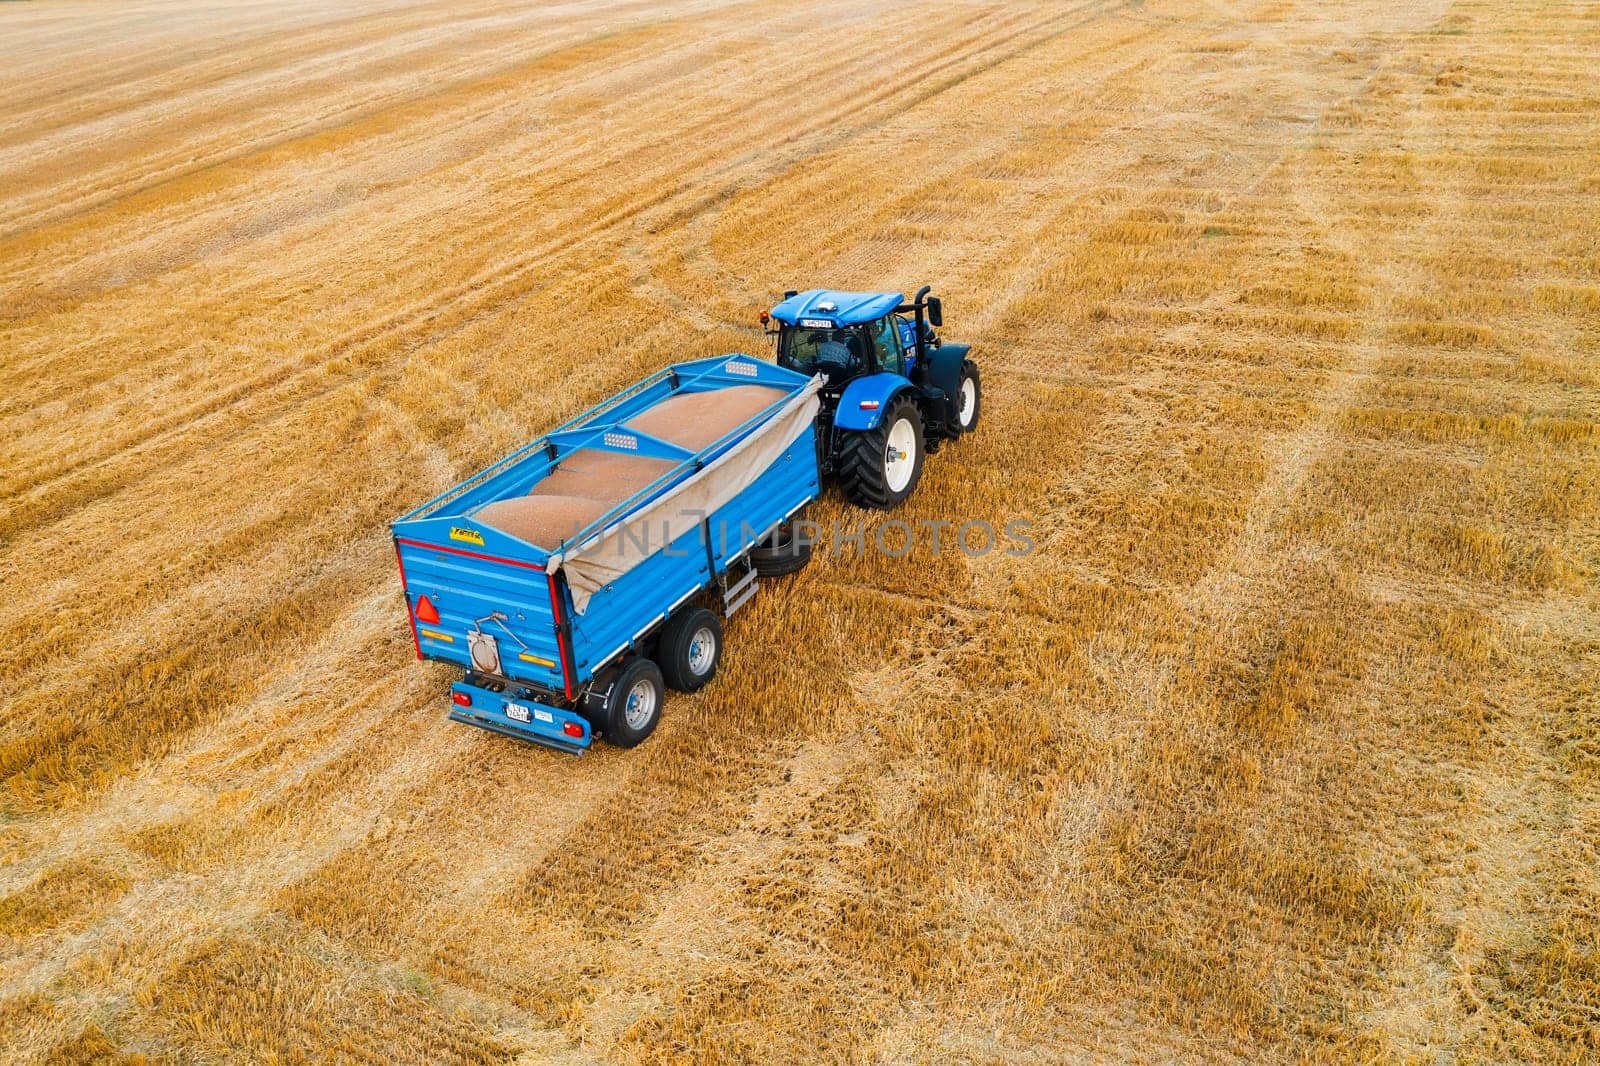 A tractor diligently pulls a trailer behind it as it traverses across a vast field, showcasing ongoing agricultural activities.